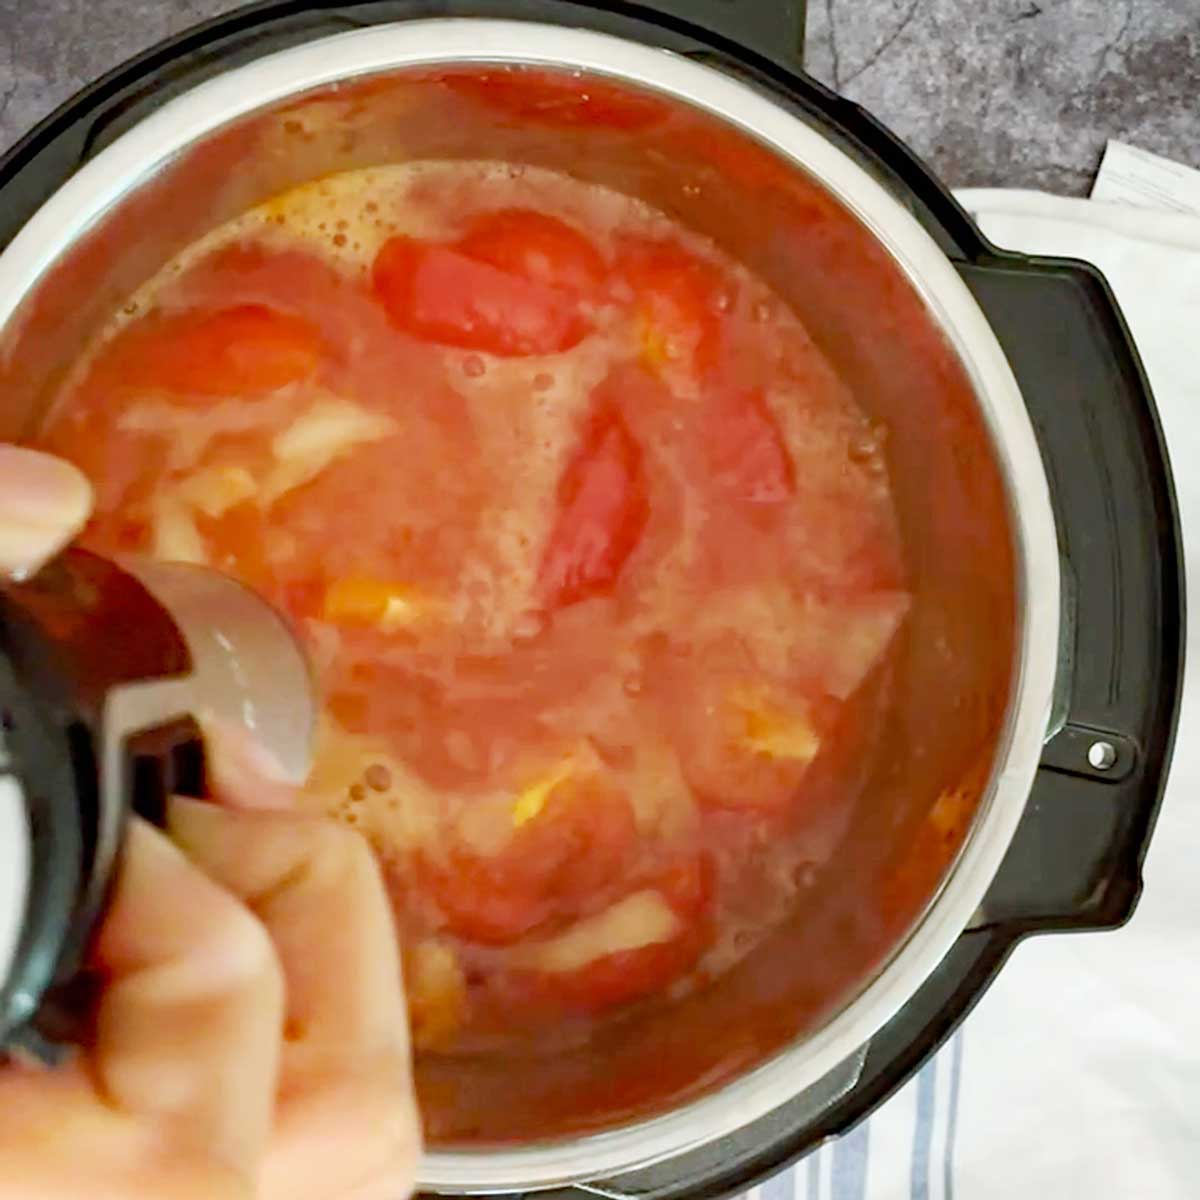 Blending tomato ketchup ingredients after cooking.